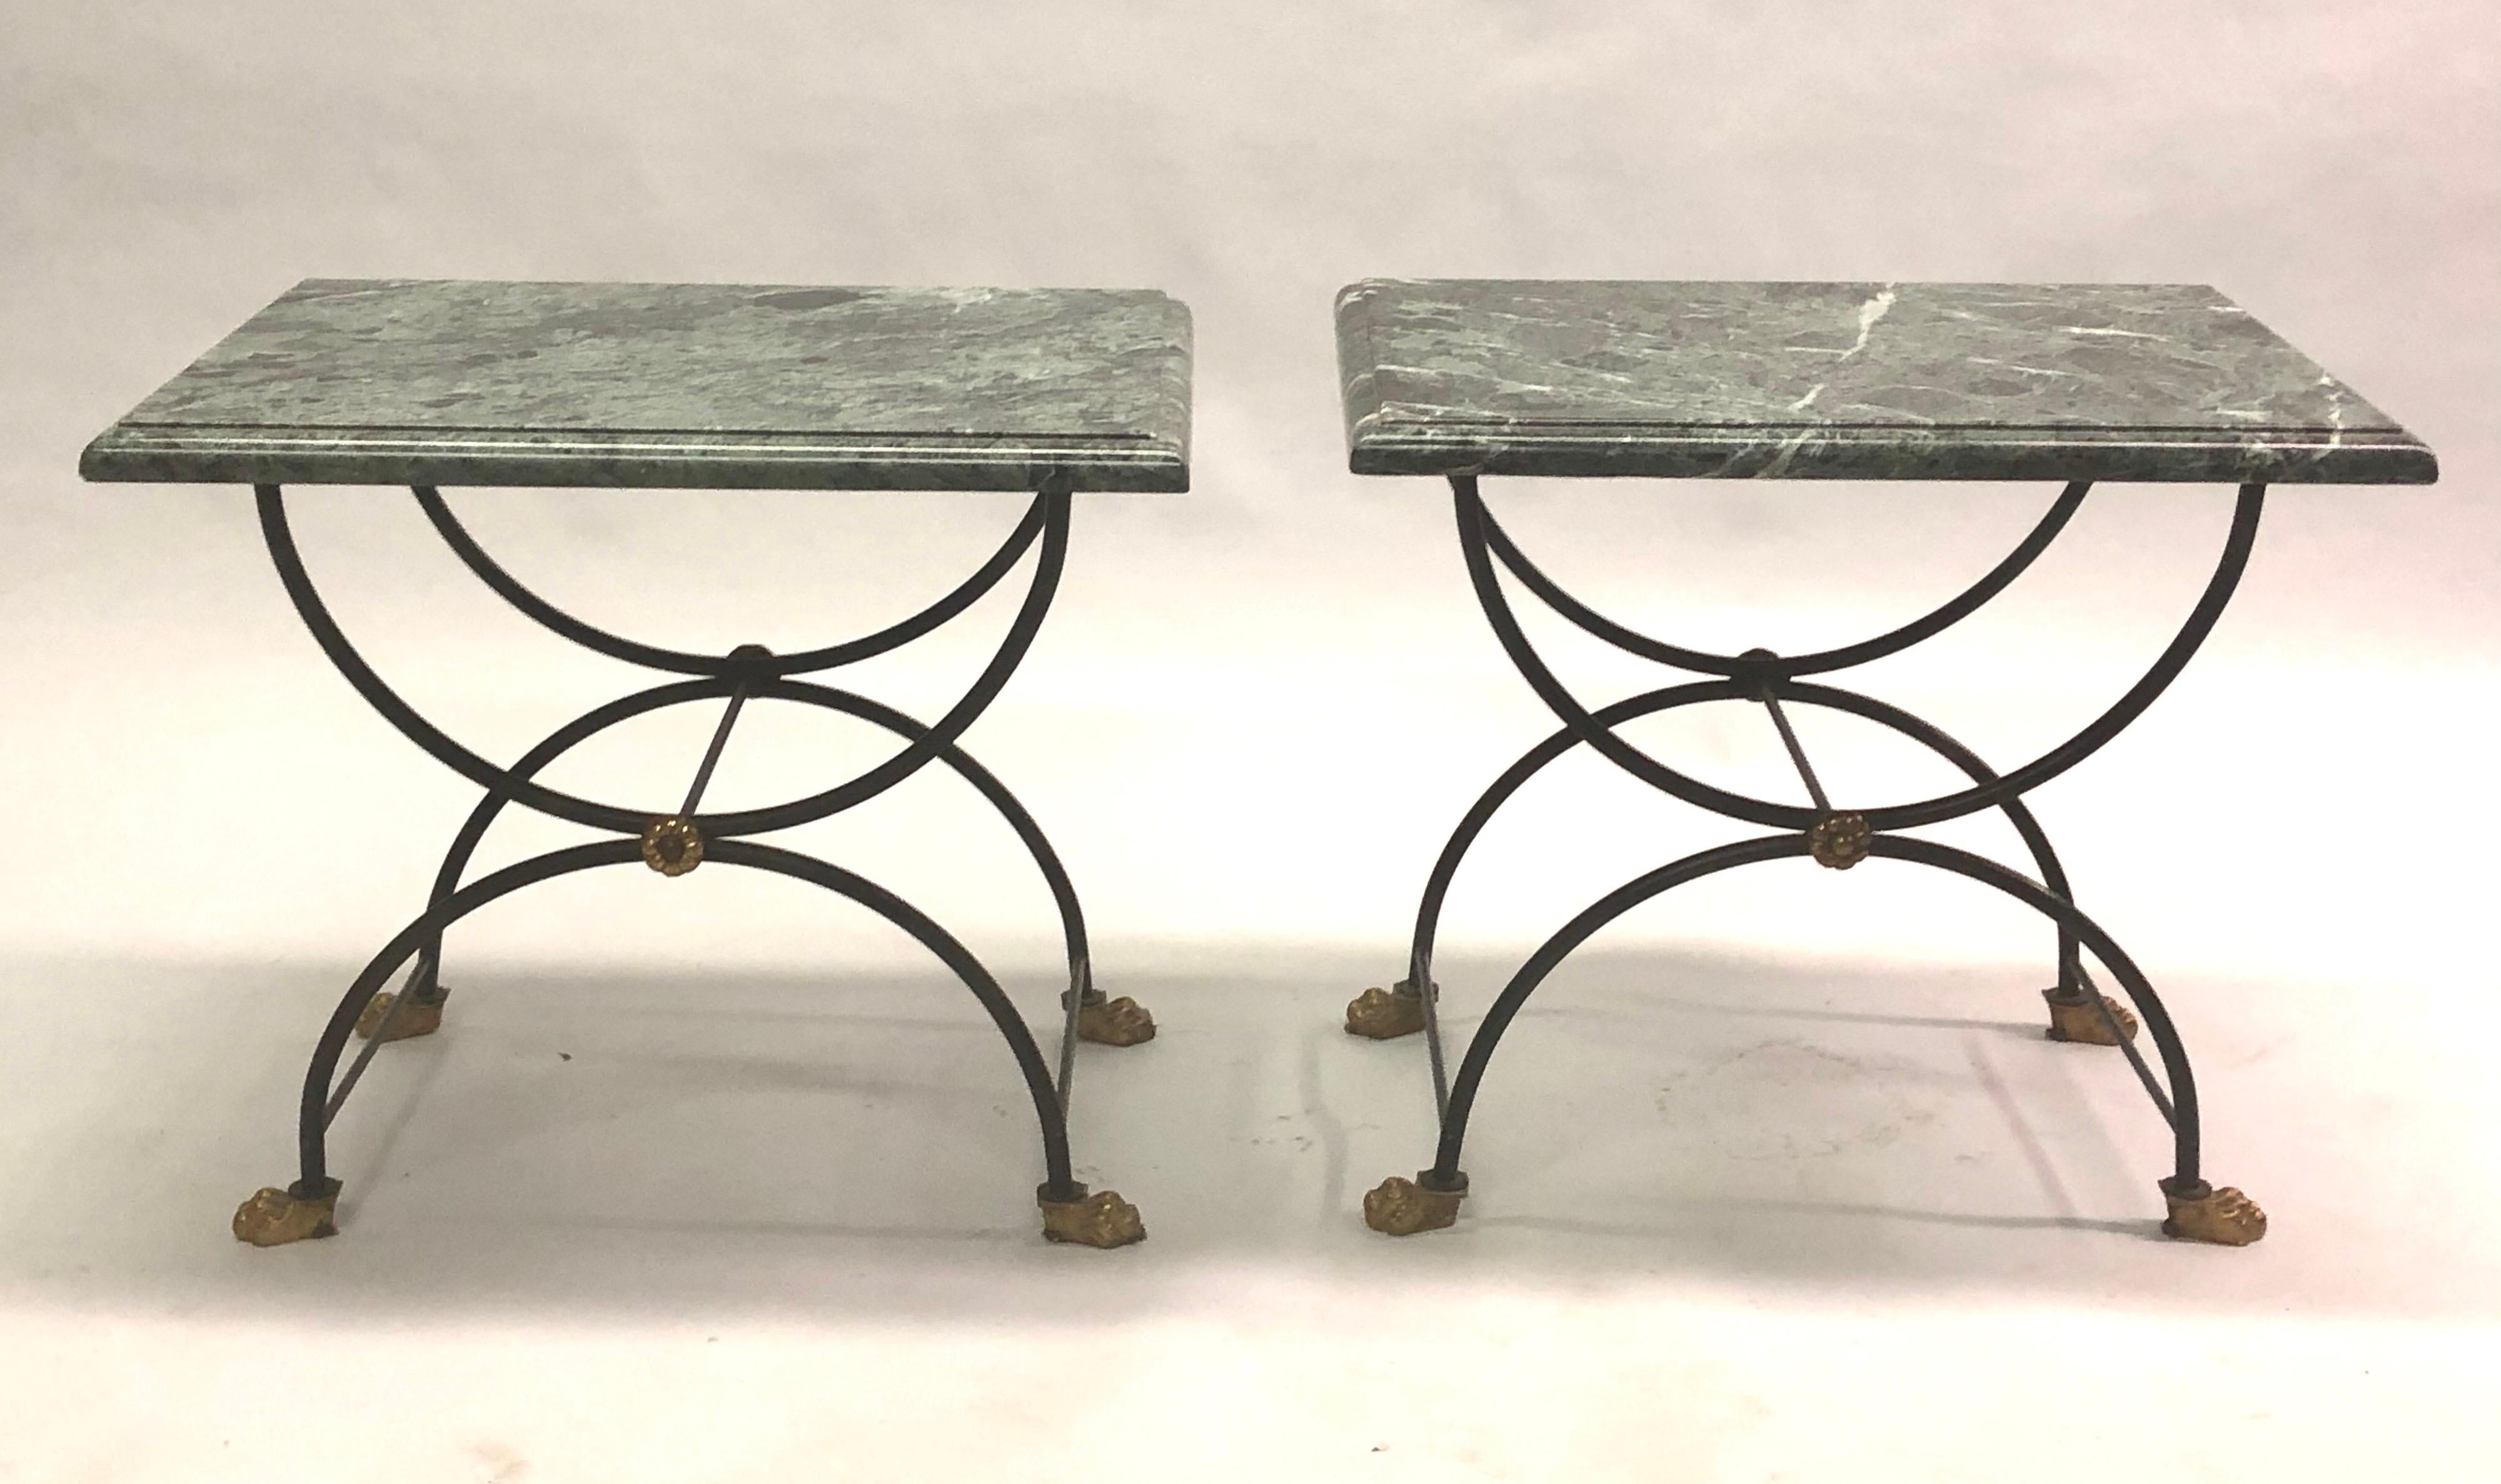 Pair of French Mid-Century Modern neoclassical end or side tables attributed to Jean-Charles Moreux for Maison Jansen. 

The tables feature wrought iron bases in a classic X frame Curile form, beveled thick marble tops and are finished with gilt